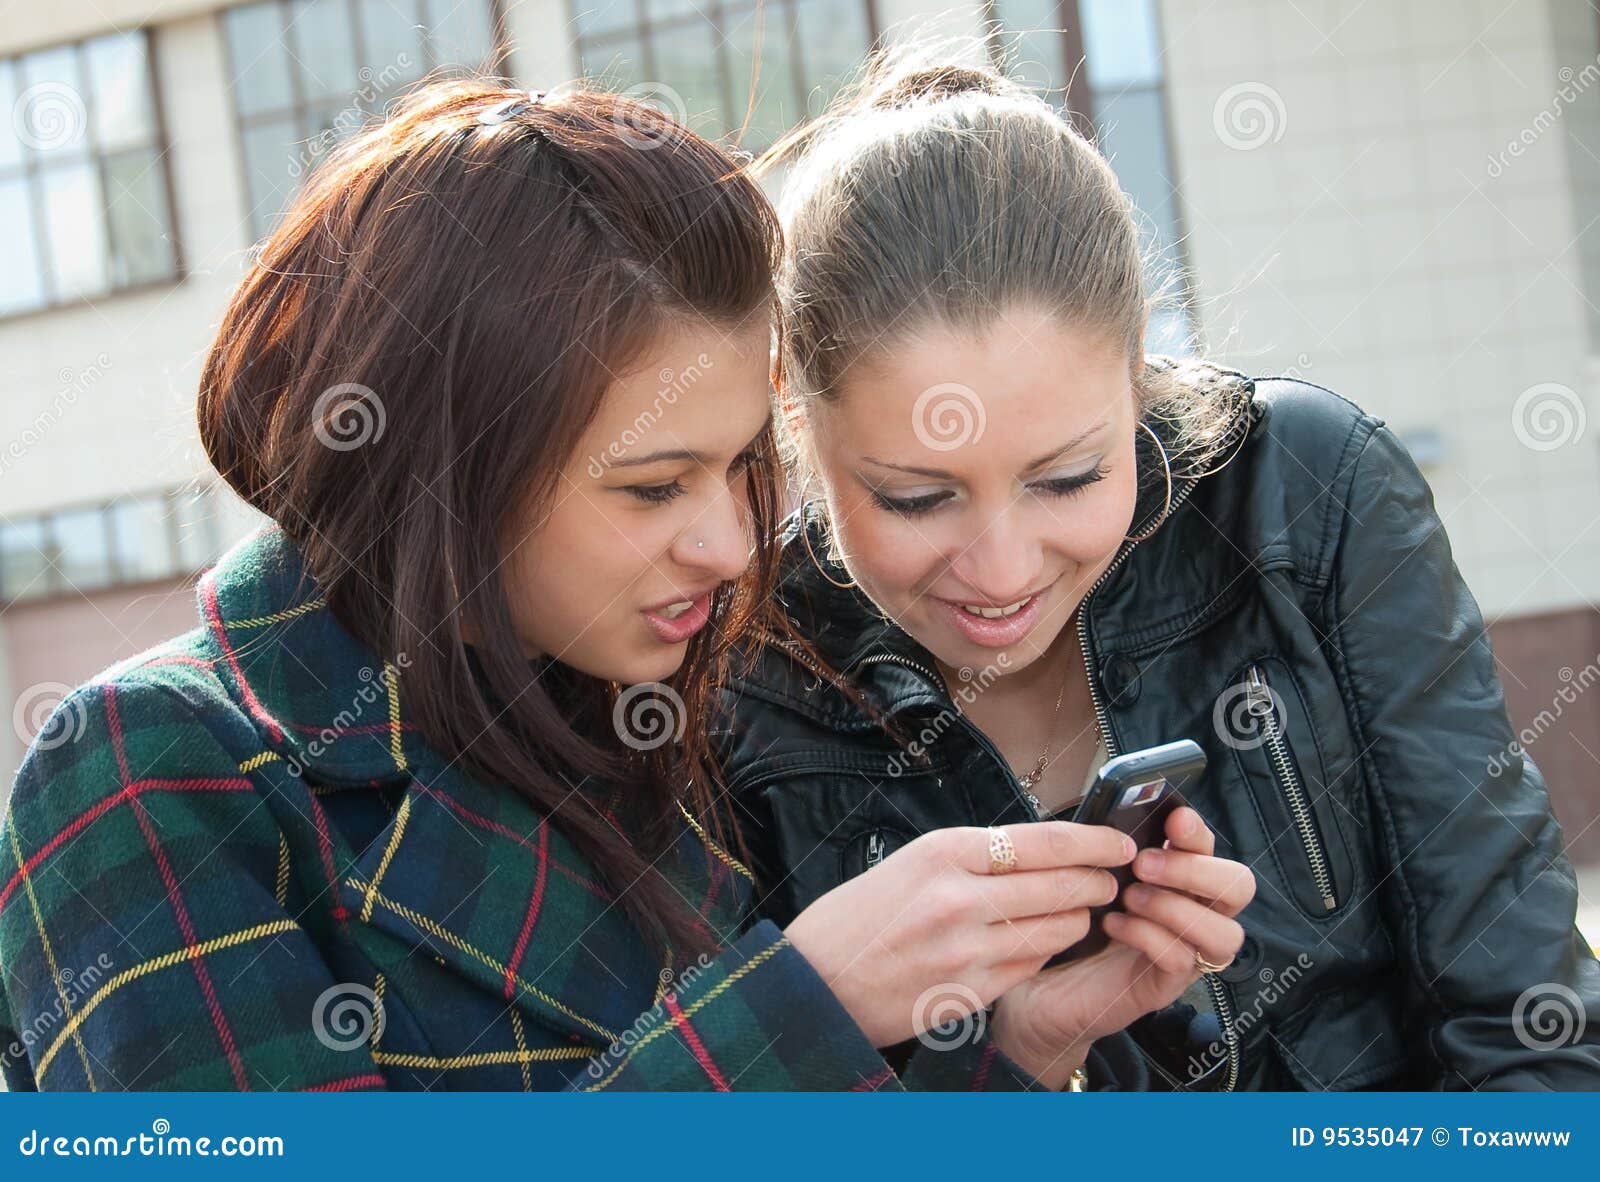 girls watching each other